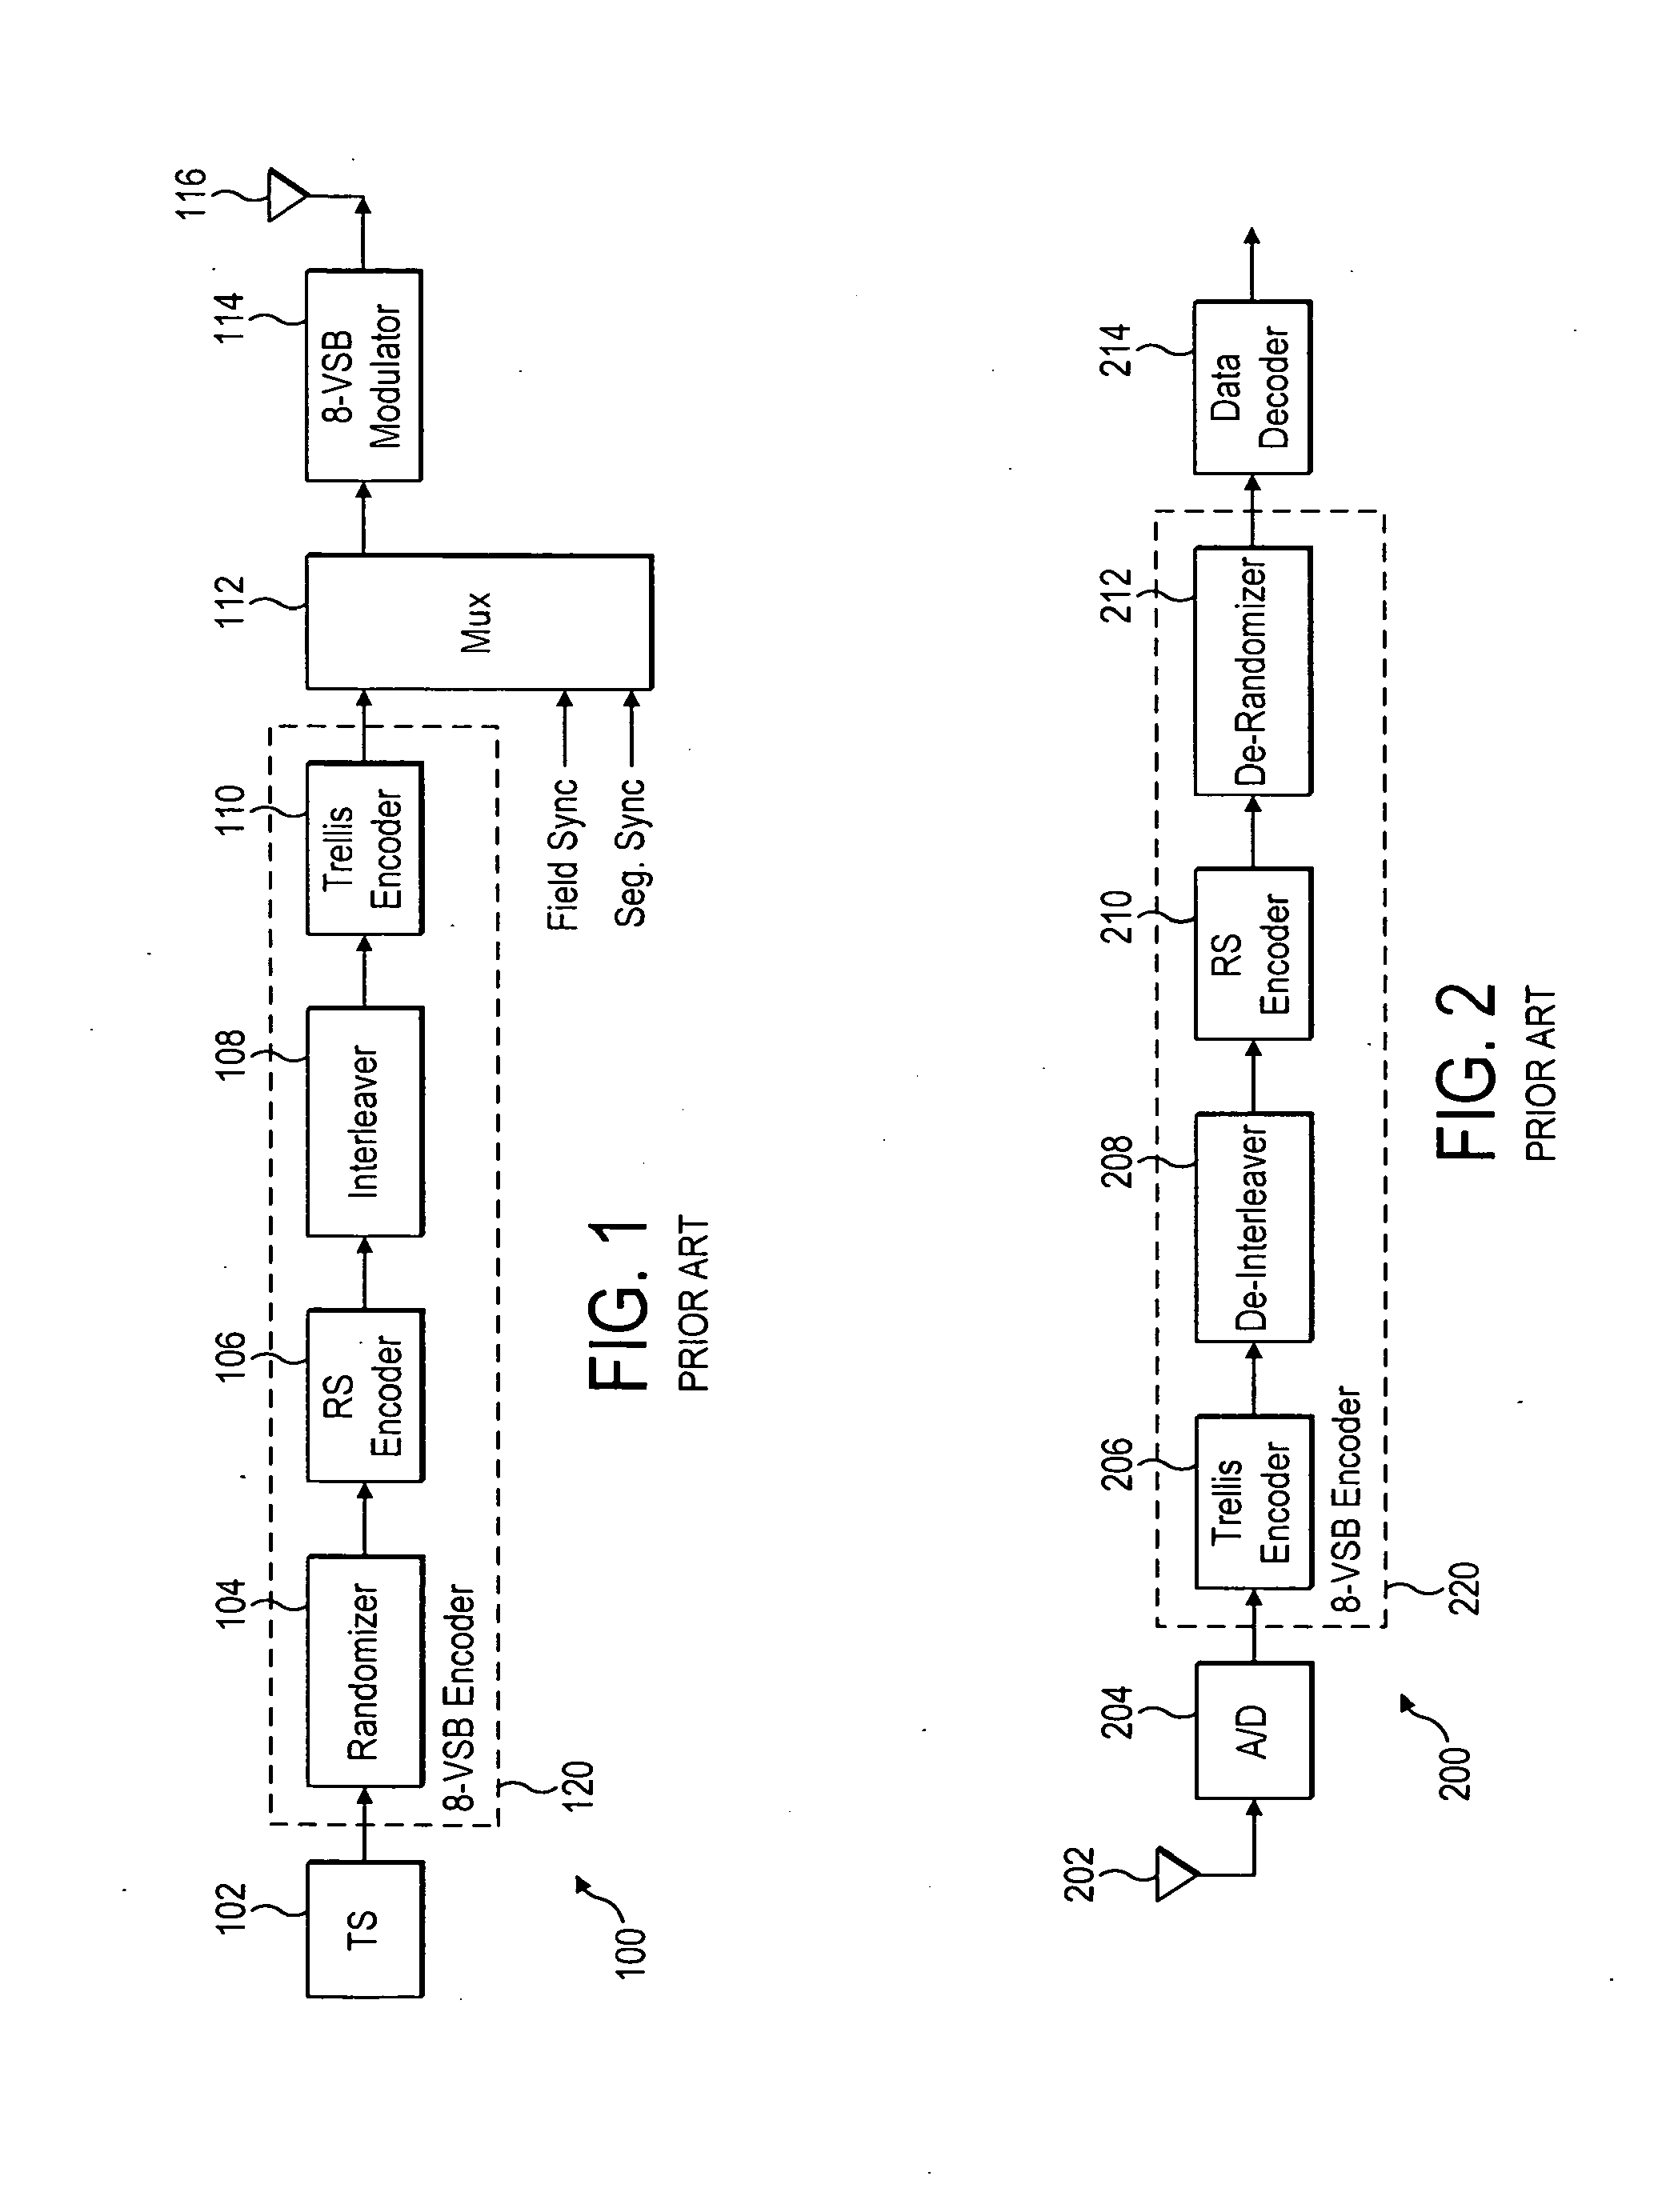 Apparatus and method for encoding and decoding signals